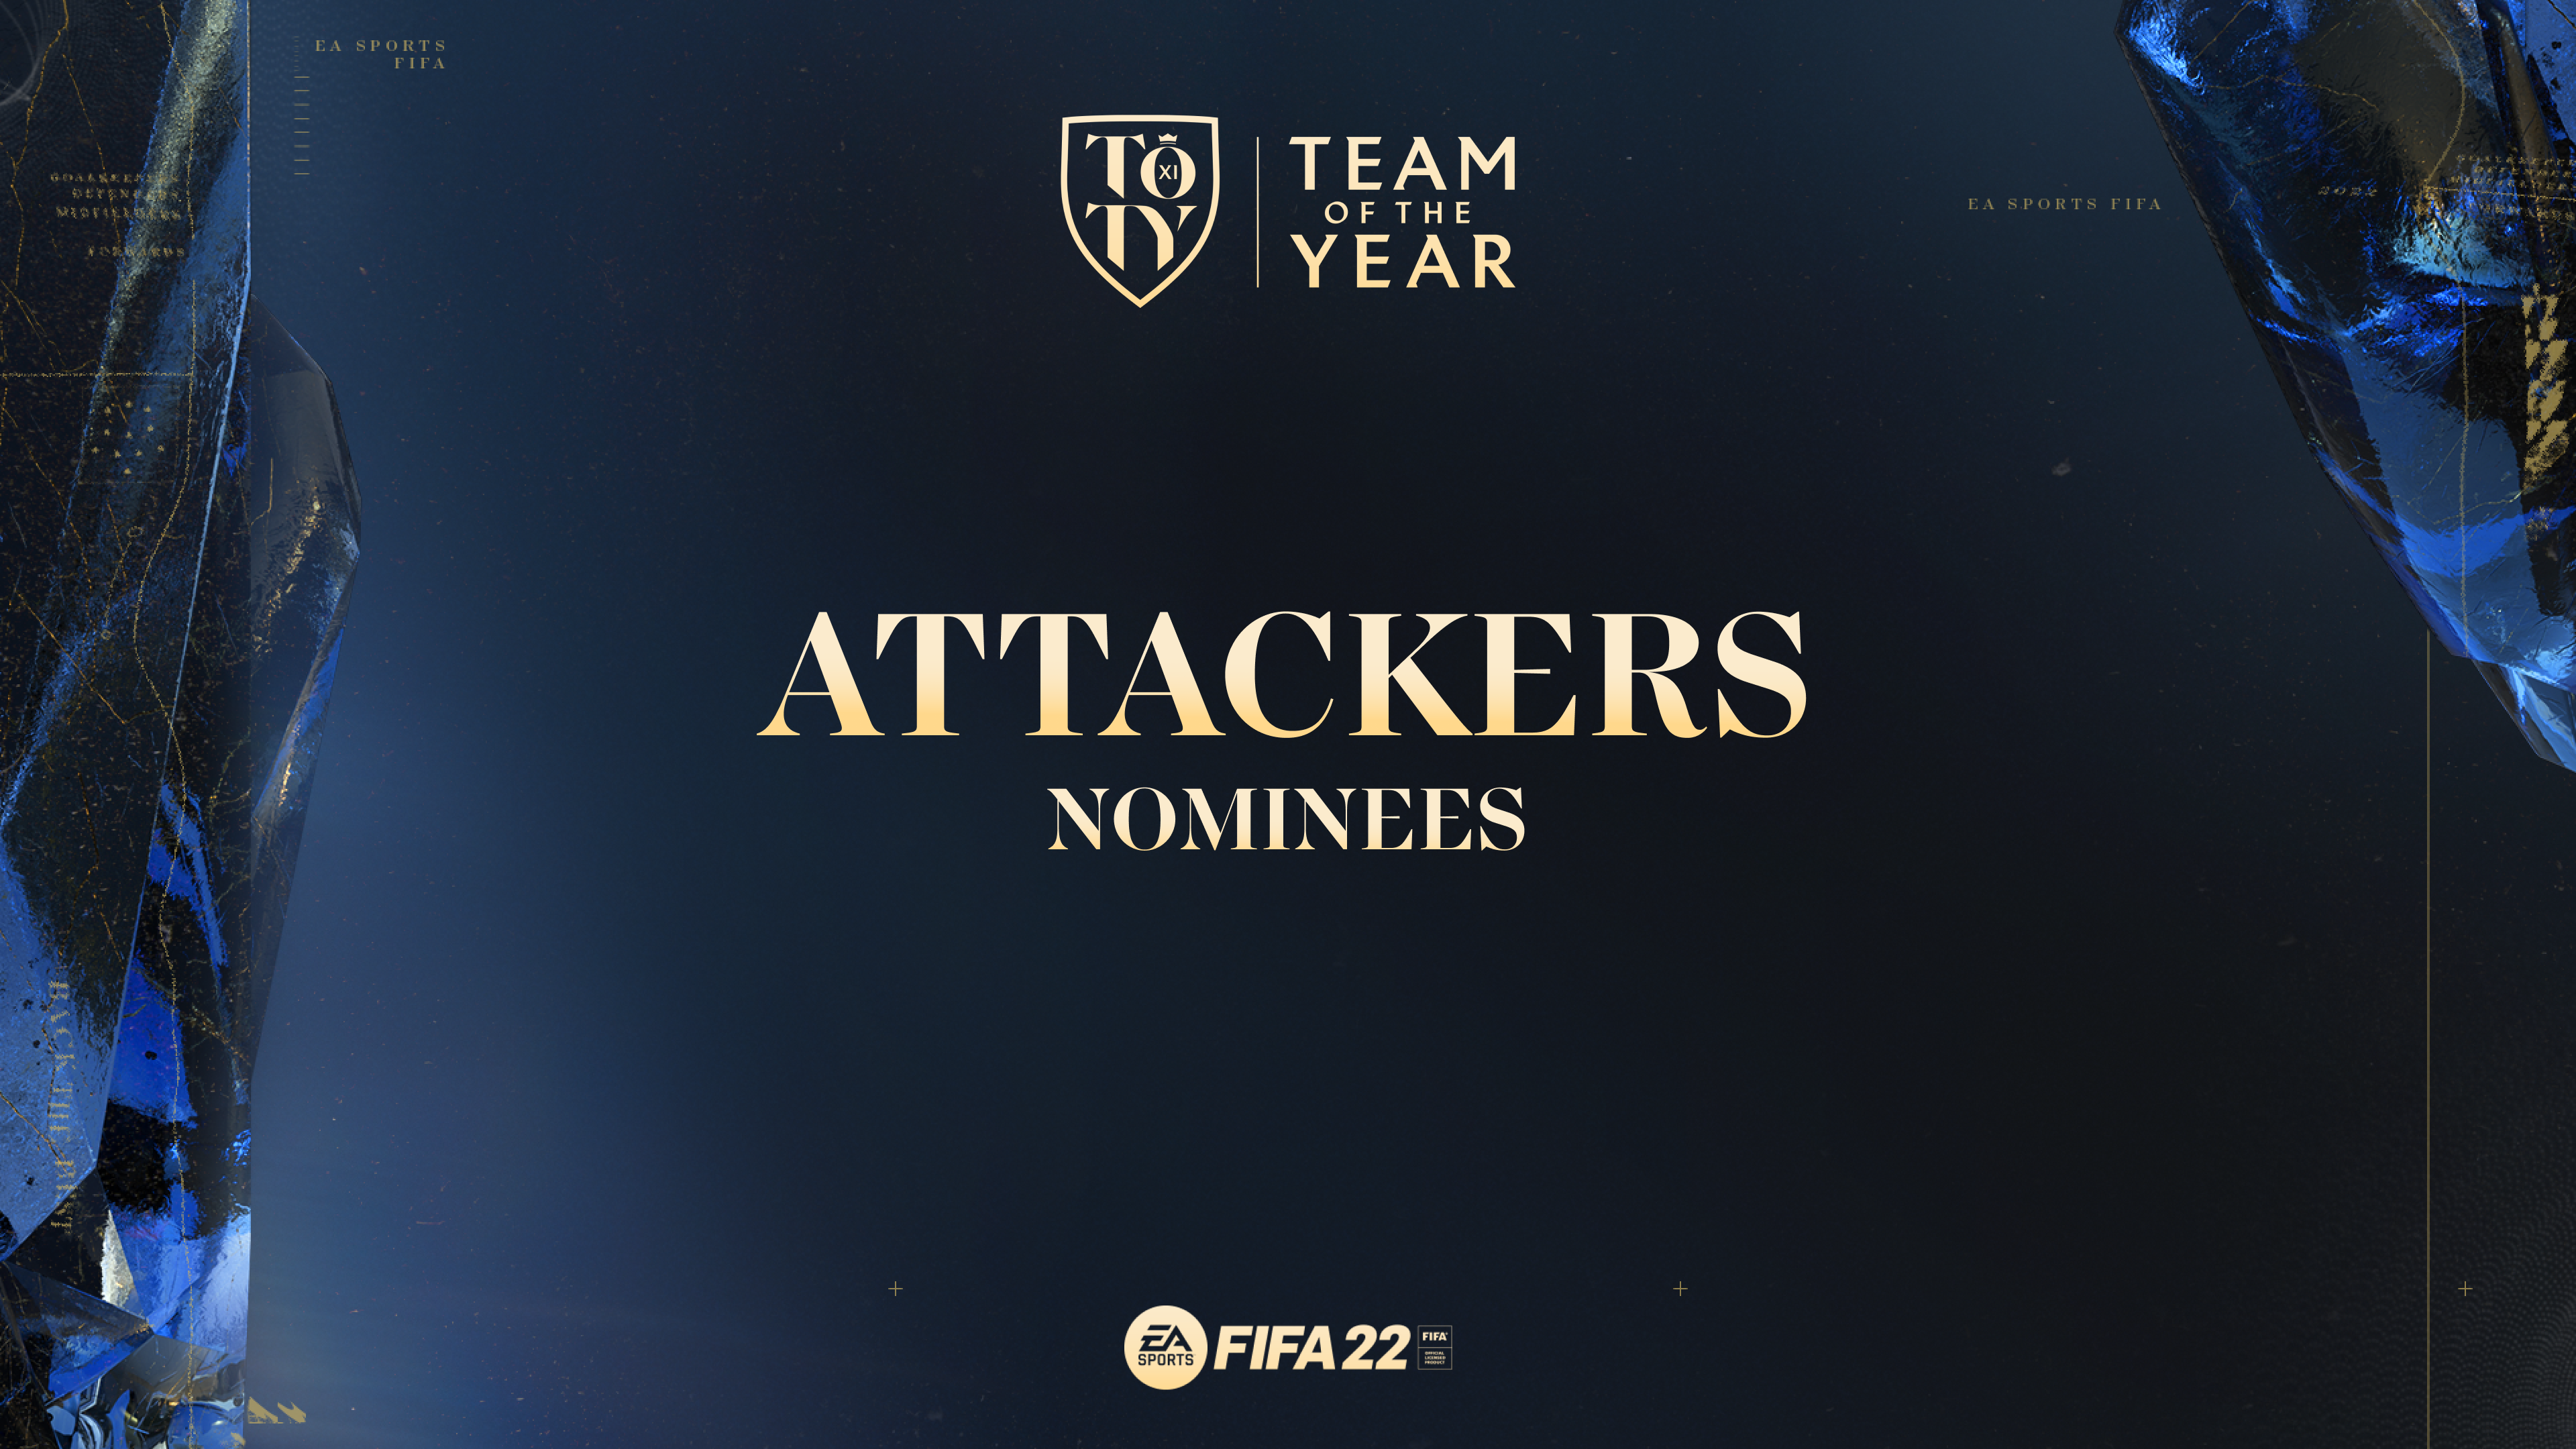 Team of the year fifa 22